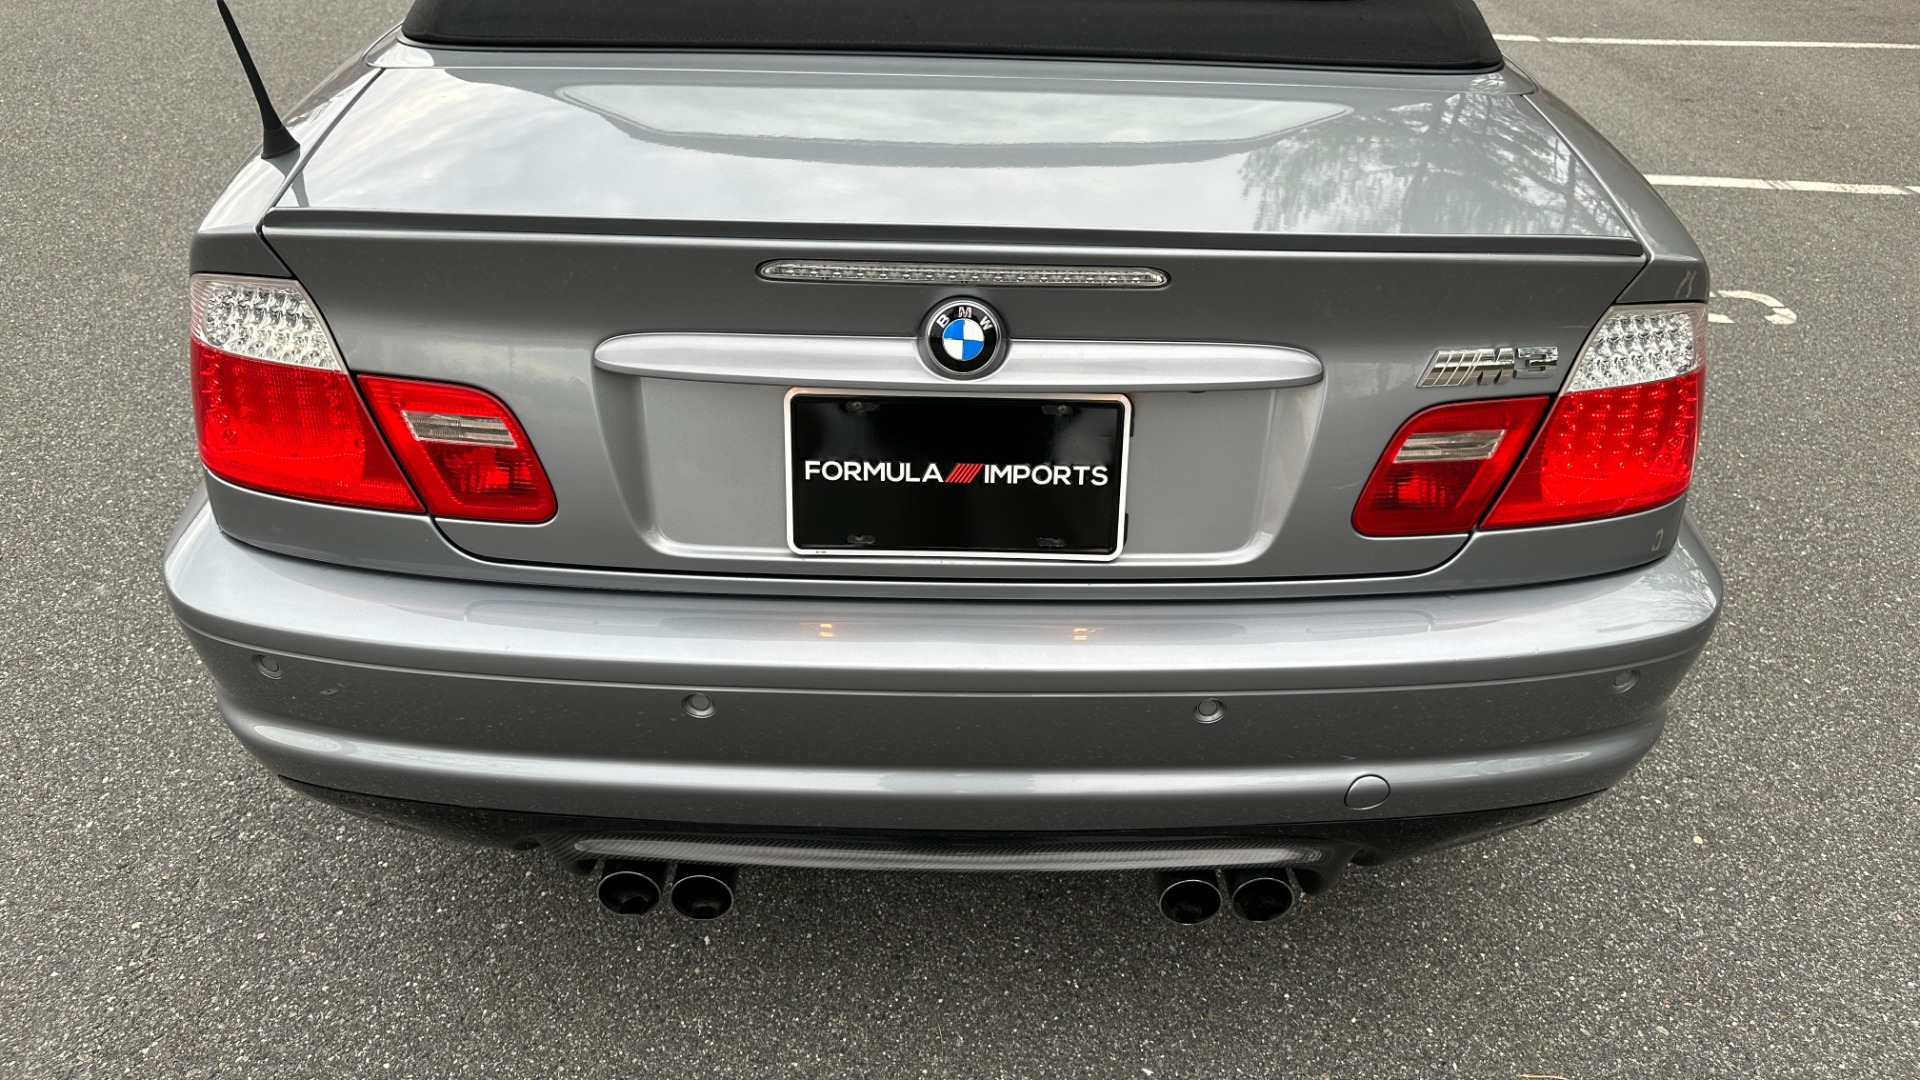 Used 2006 BMW M3 CONVERTIBLE / SMG AUTO / LEATHER / INLINE 6CYL / CARBON FIBER for sale $24,995 at Formula Imports in Charlotte NC 28227 44